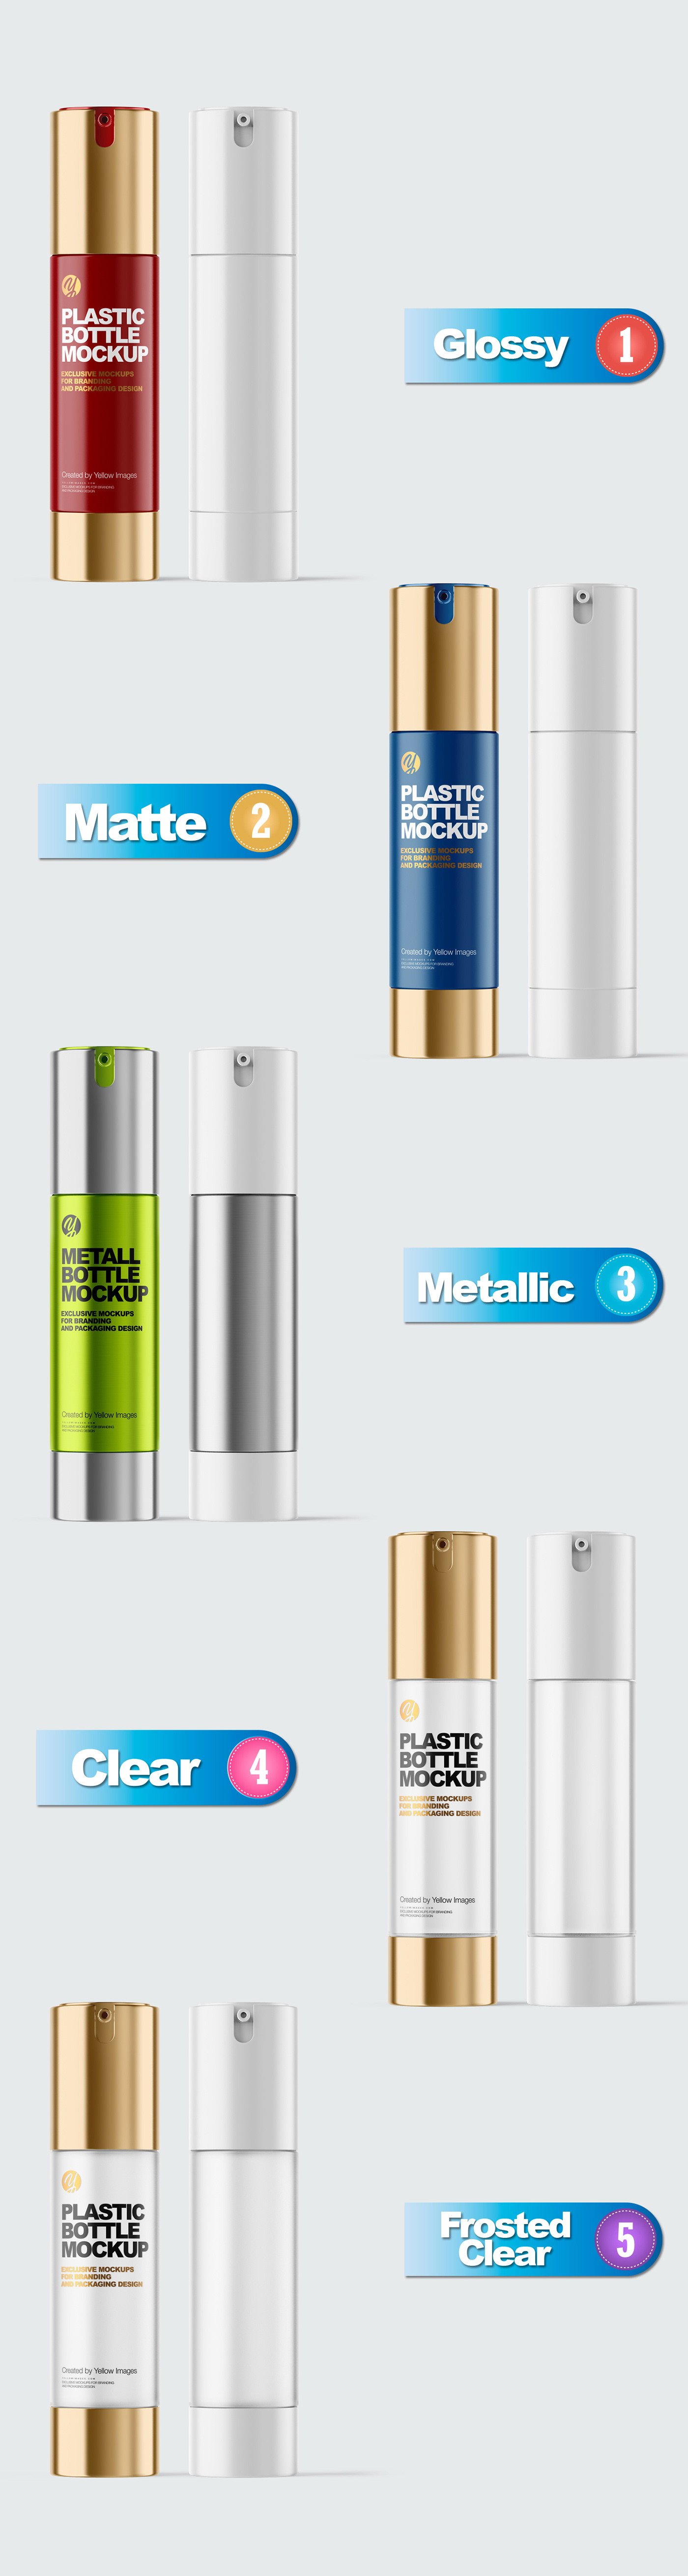 Airless Cosmetic Bottles Mockups On Behance